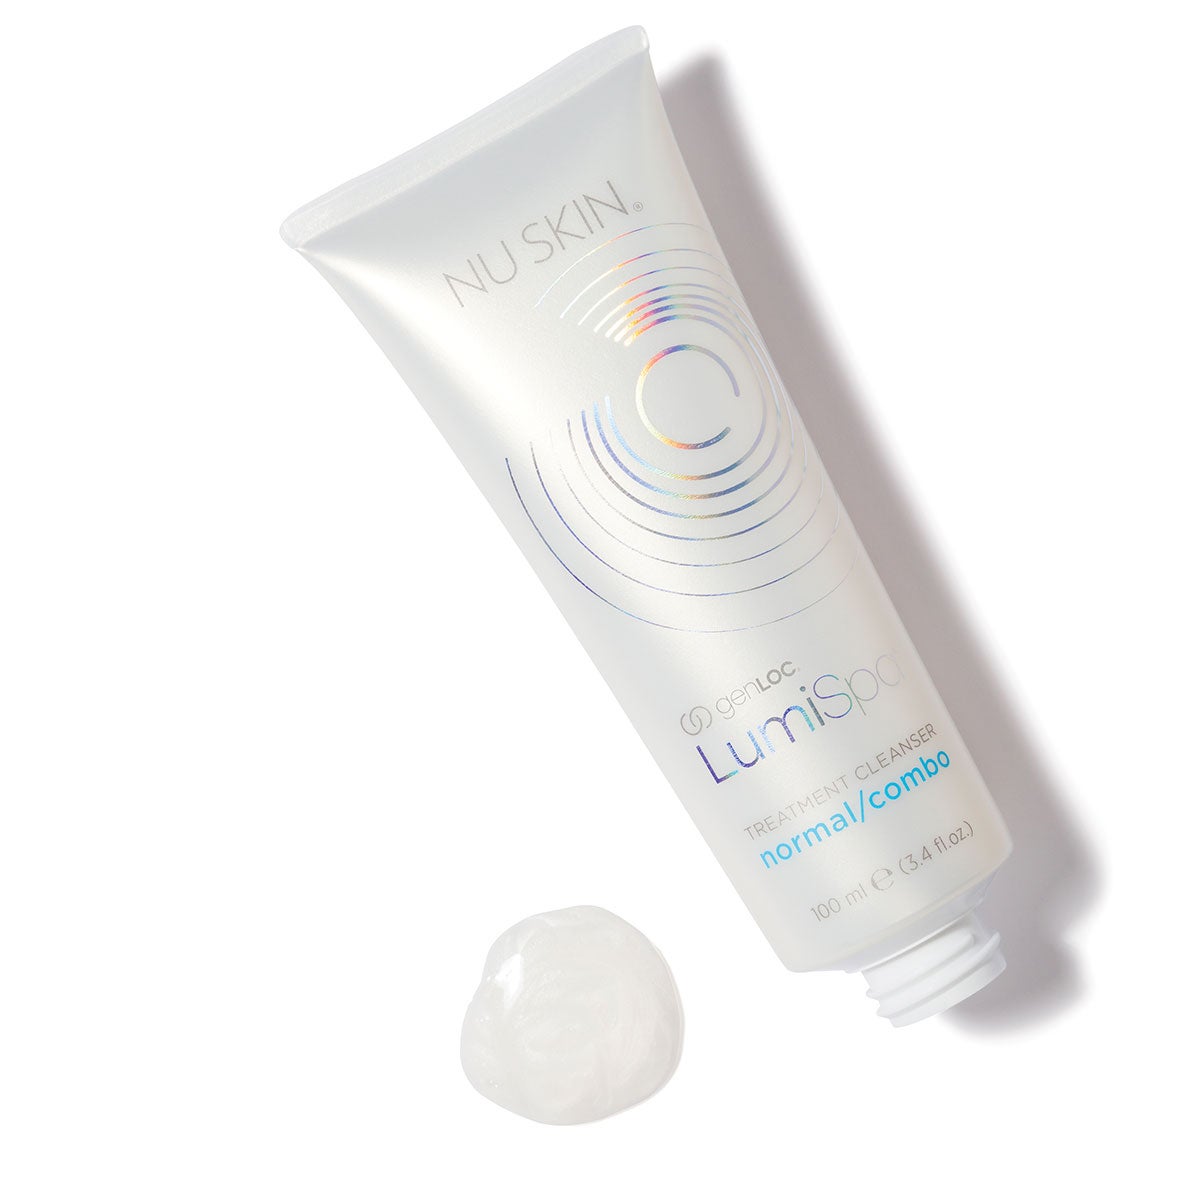 LumiSpa Cleanser Normal/Combo White Background with Product